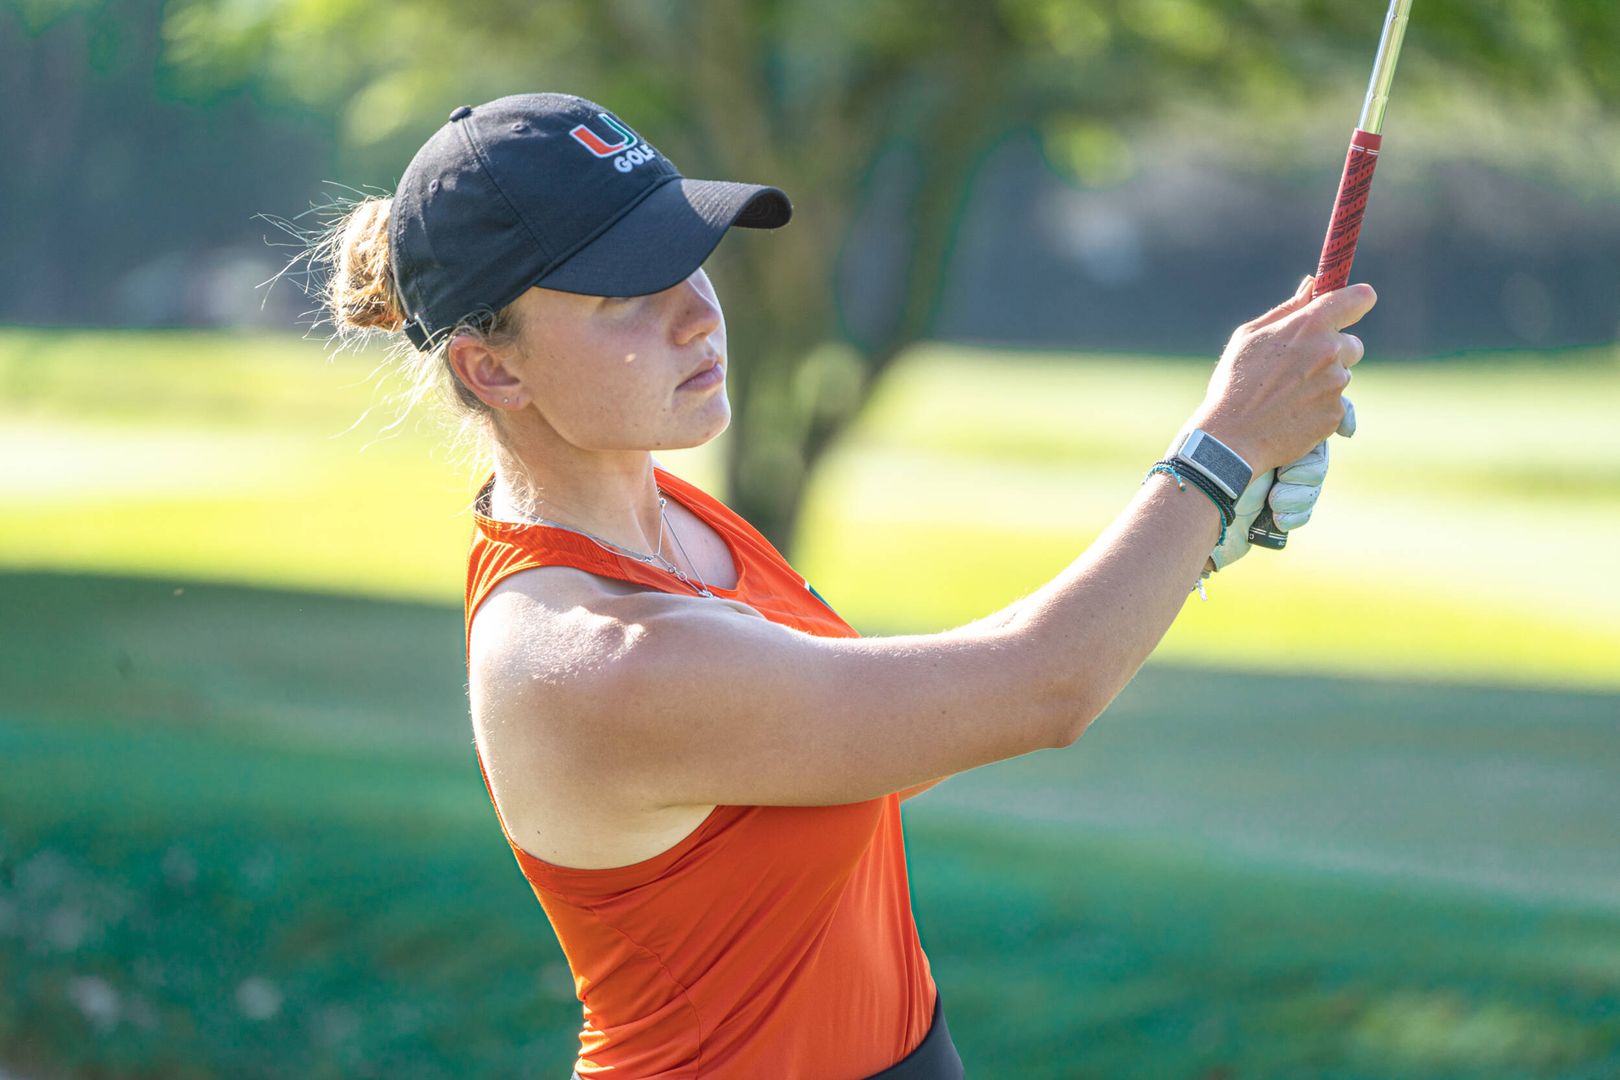 Guseva Wraps Up First Day at the NCAA Championship